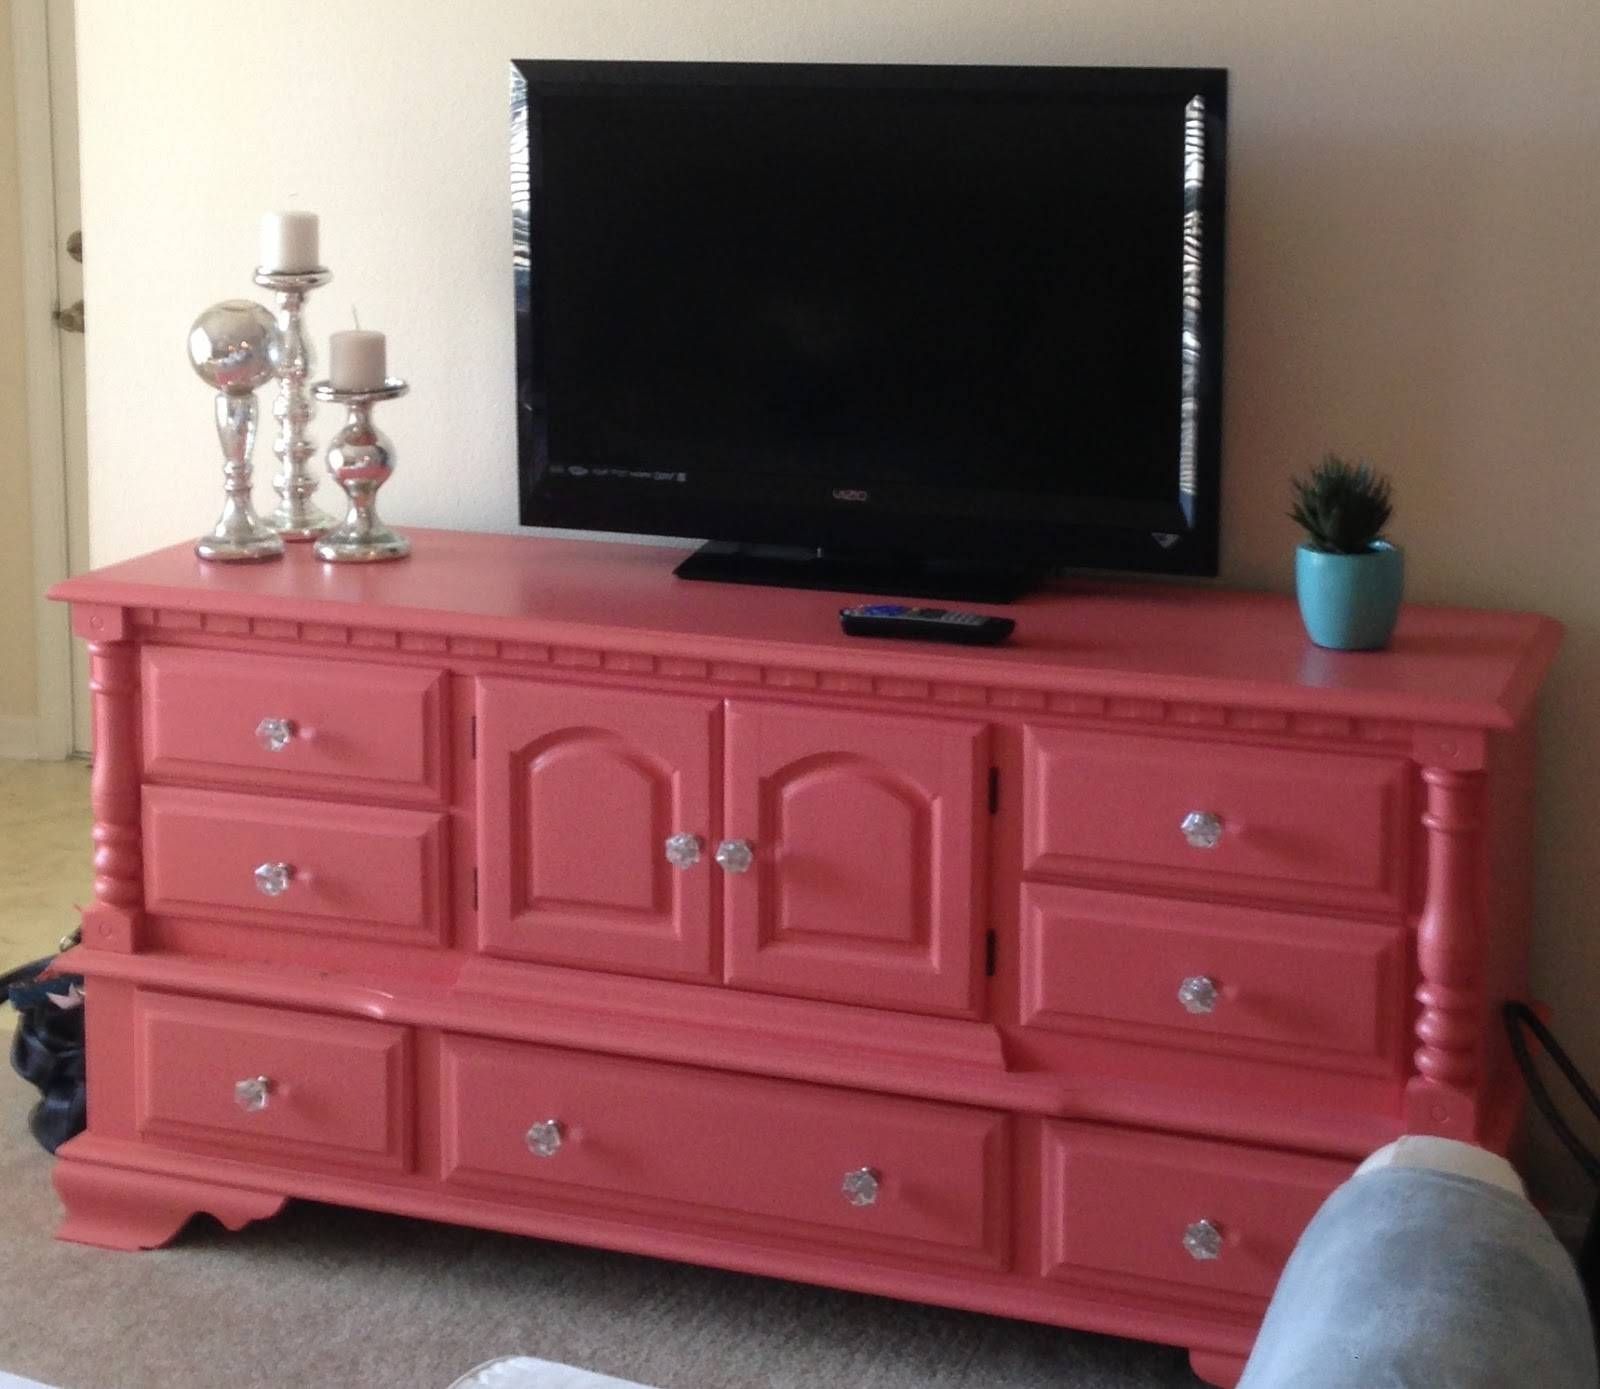 Reclaiming The Empty Nest: Reclaiming The Used Dresser Into A Tv Stand Throughout Dresser And Tv Stands Combination (View 5 of 15)